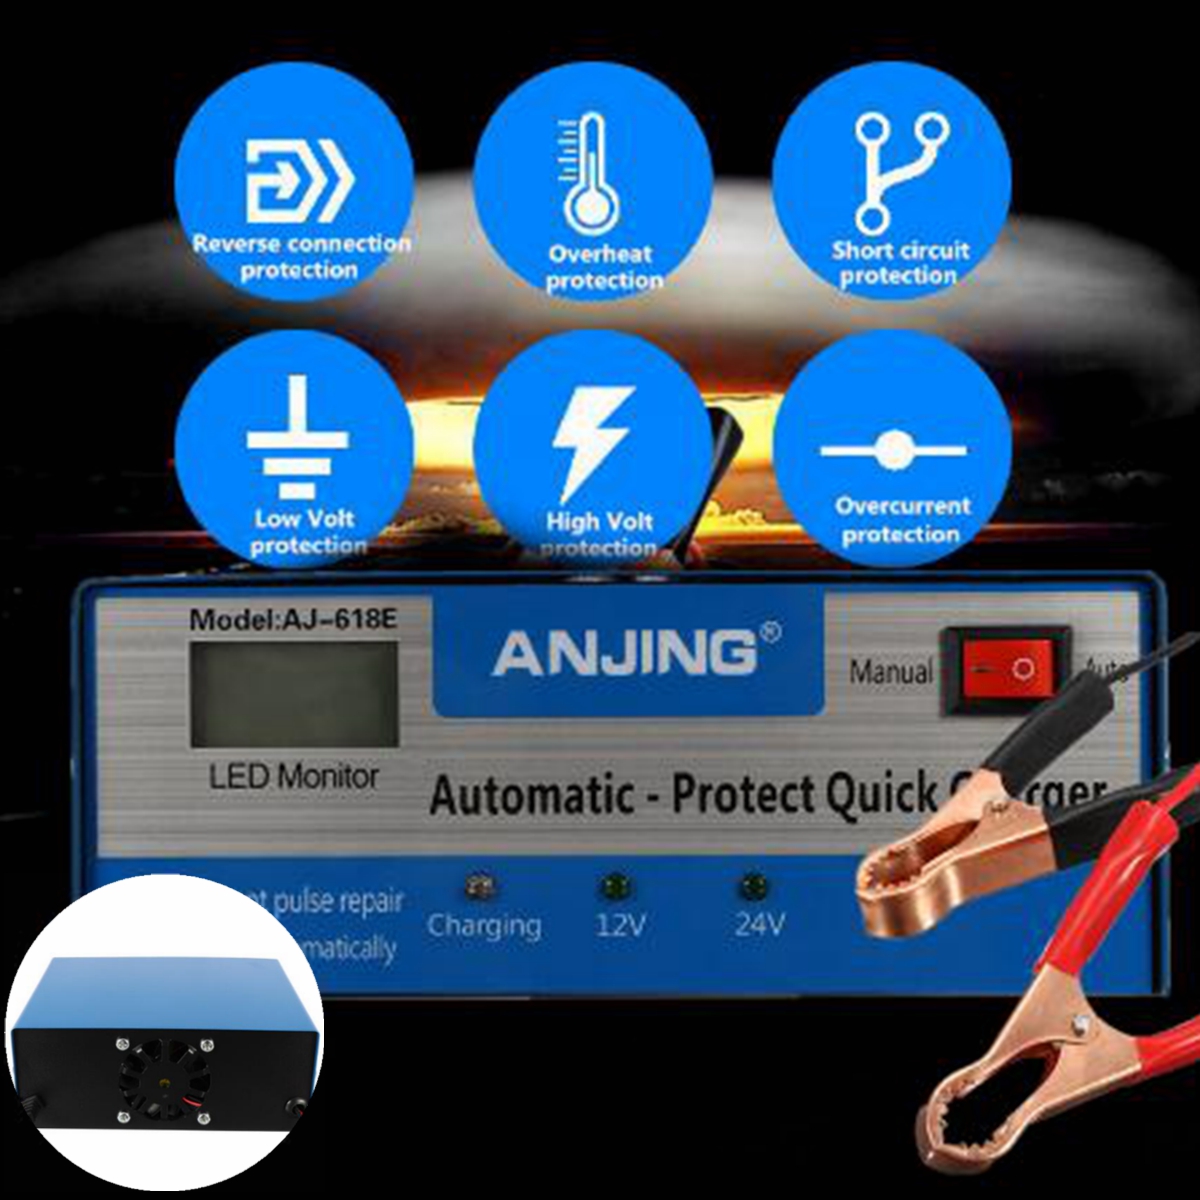 LCD-12V24V-Intelligent-Automatic-Battery-Charger-Pure-Copper-Charger-Pulse-Repair-Type-Maintainer-fo-1449218-4